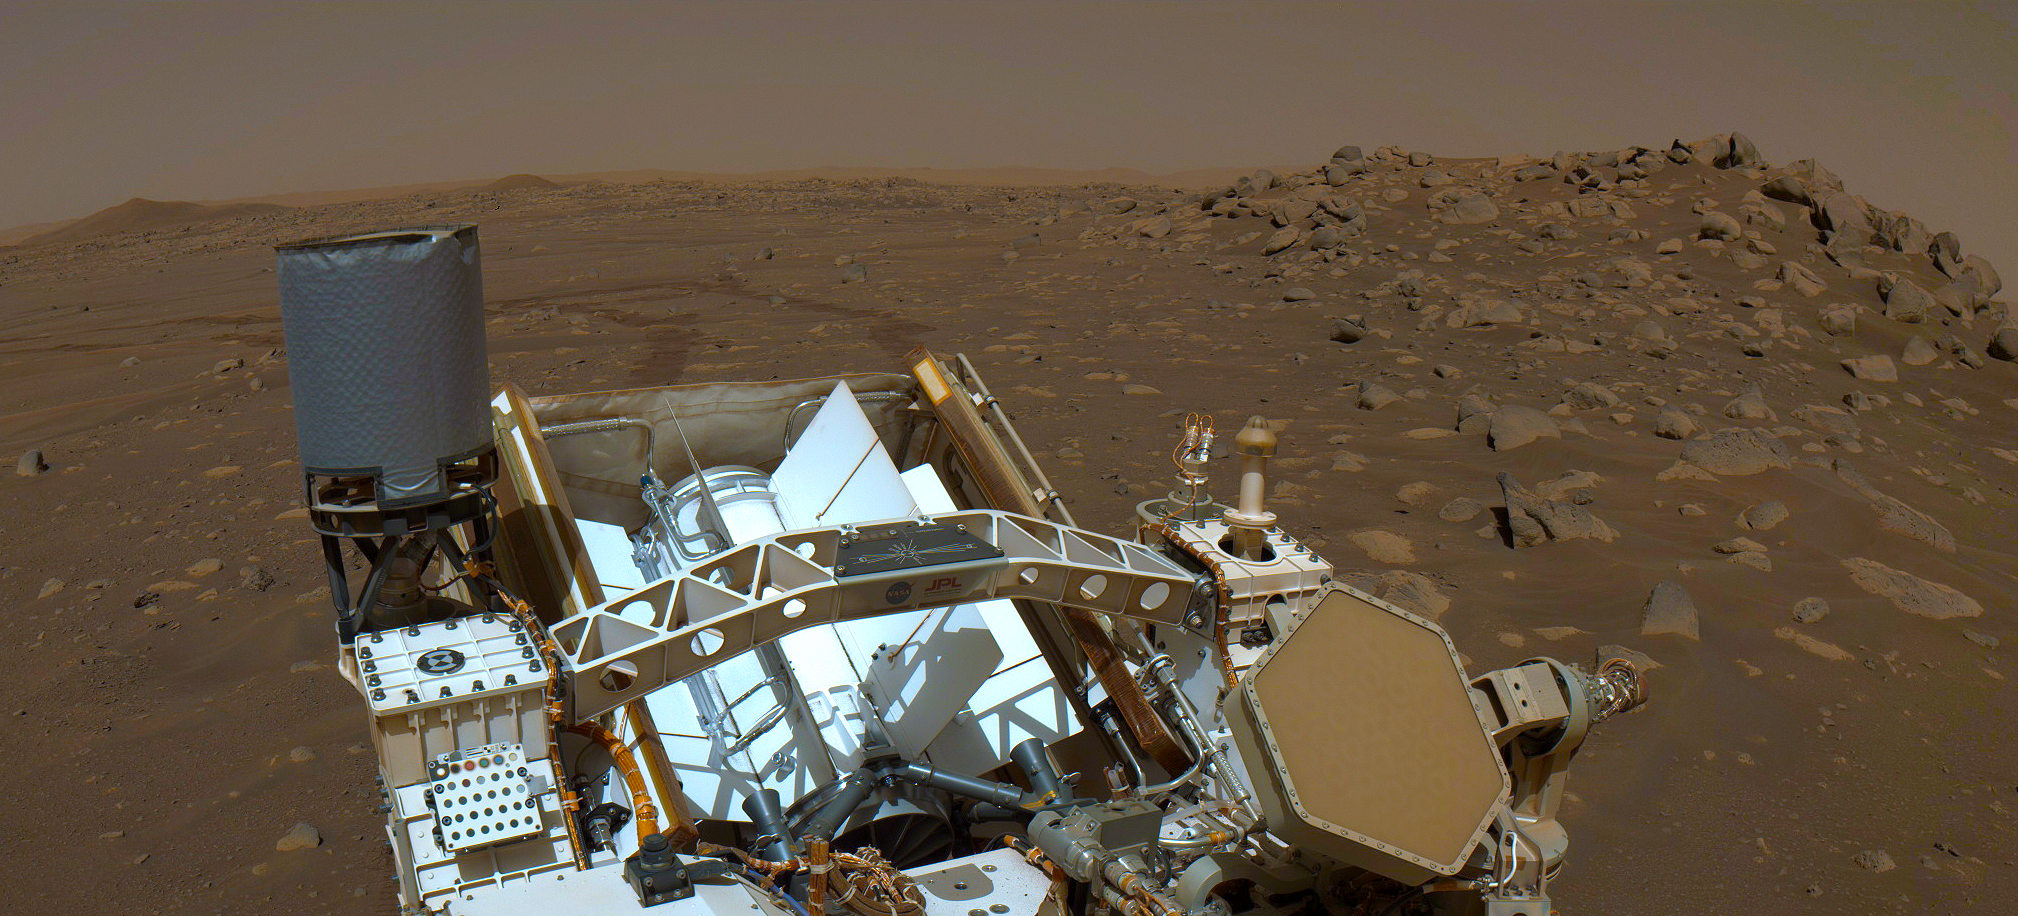 This view looking across the back of the Perseverance rover shows the rover's Radioisotope Thermoelectric Generator (RTG). A rocky, red landscape dotted with rocks fills the horizon.